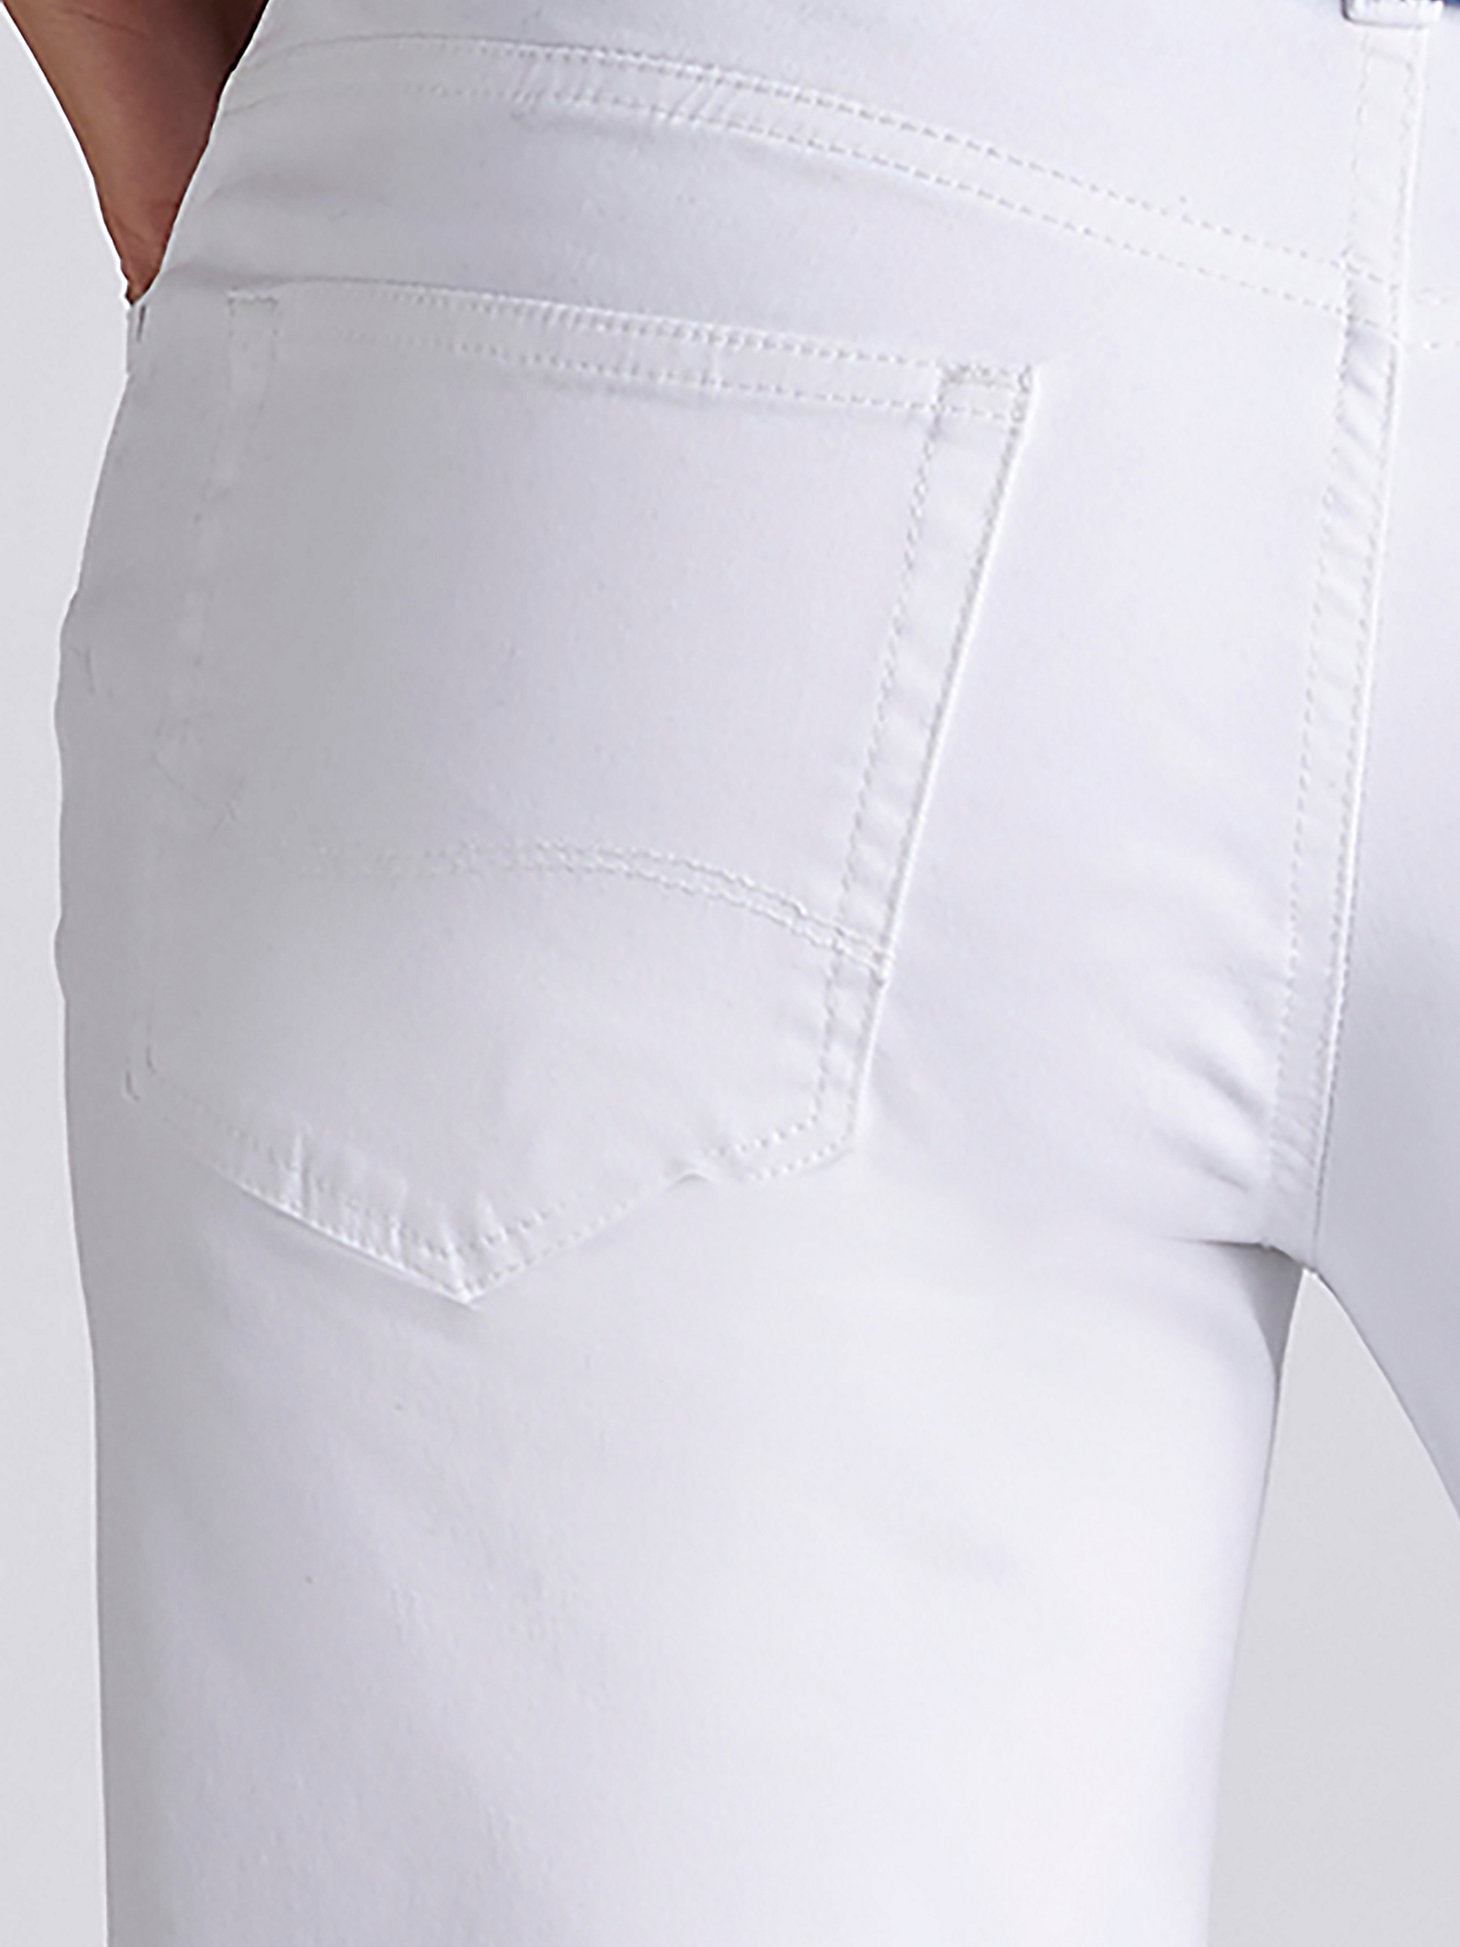 Women’s Relaxed Fit Kathy Bermuda in White alternative view 2